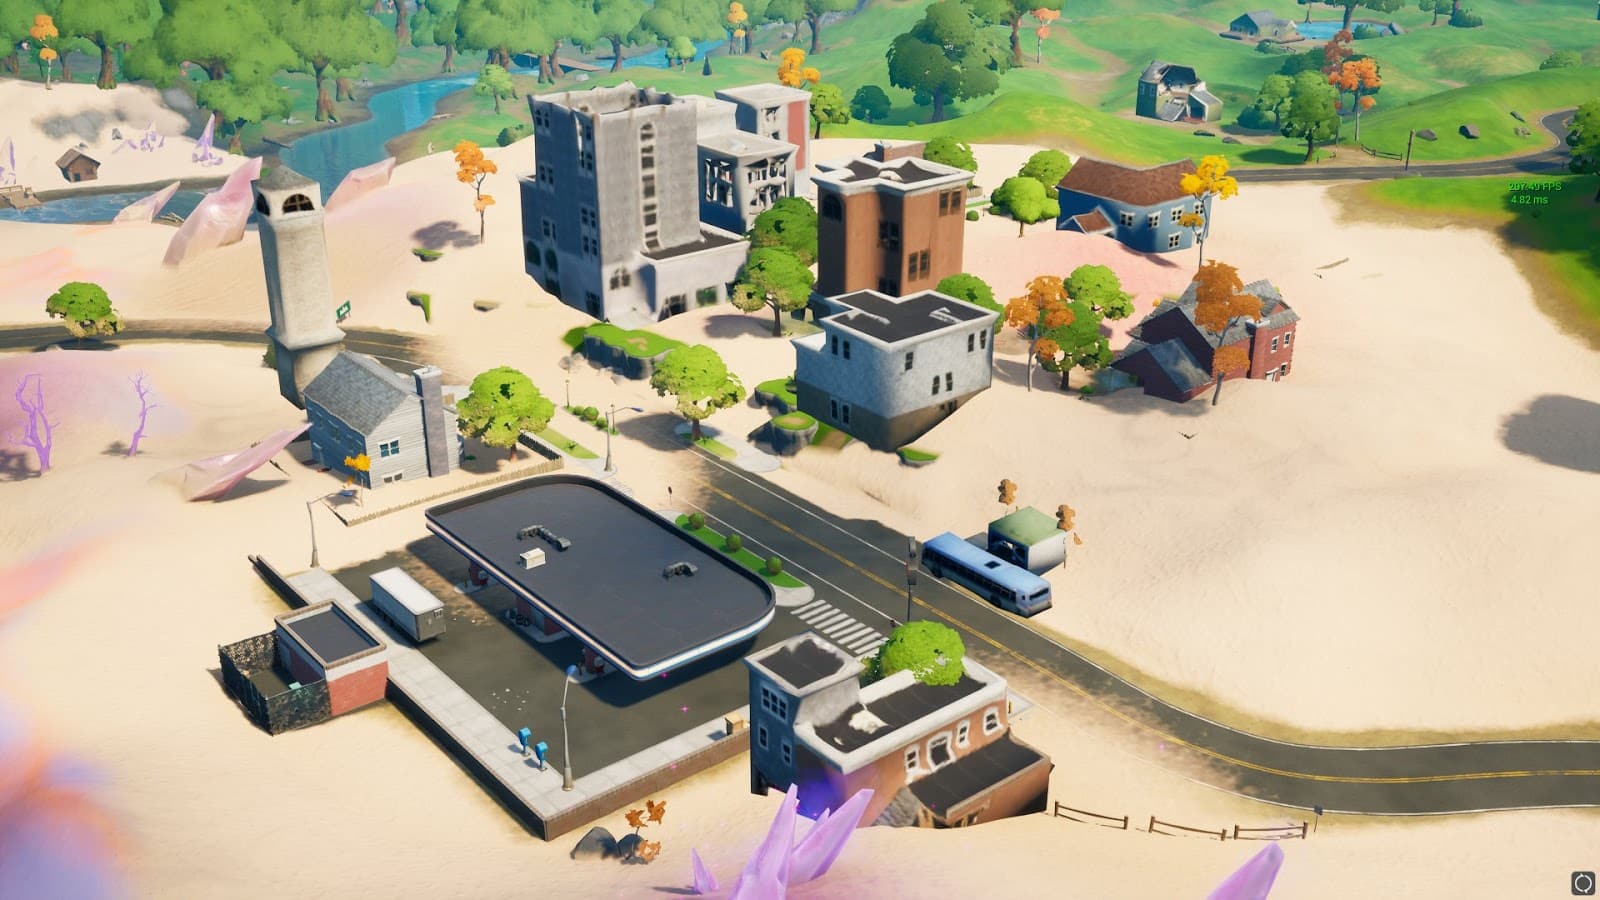 Fortnite Season 5: Zero Point Patch Notes, Battle Pass, New Locations, Weapons, Items, Cosmetics & More!